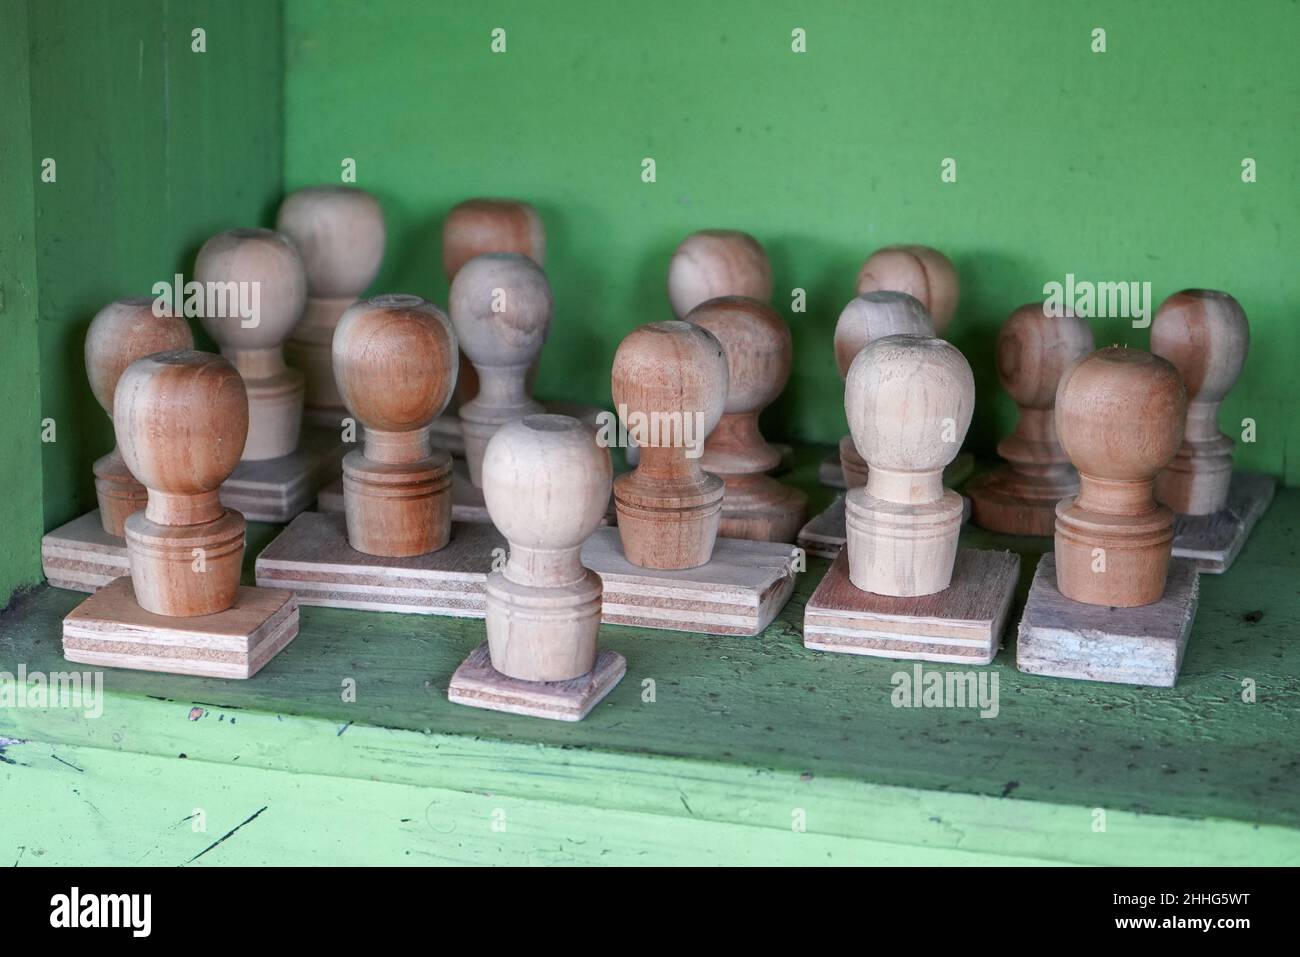 A collection of stamps made of brown wood. Stock Photo